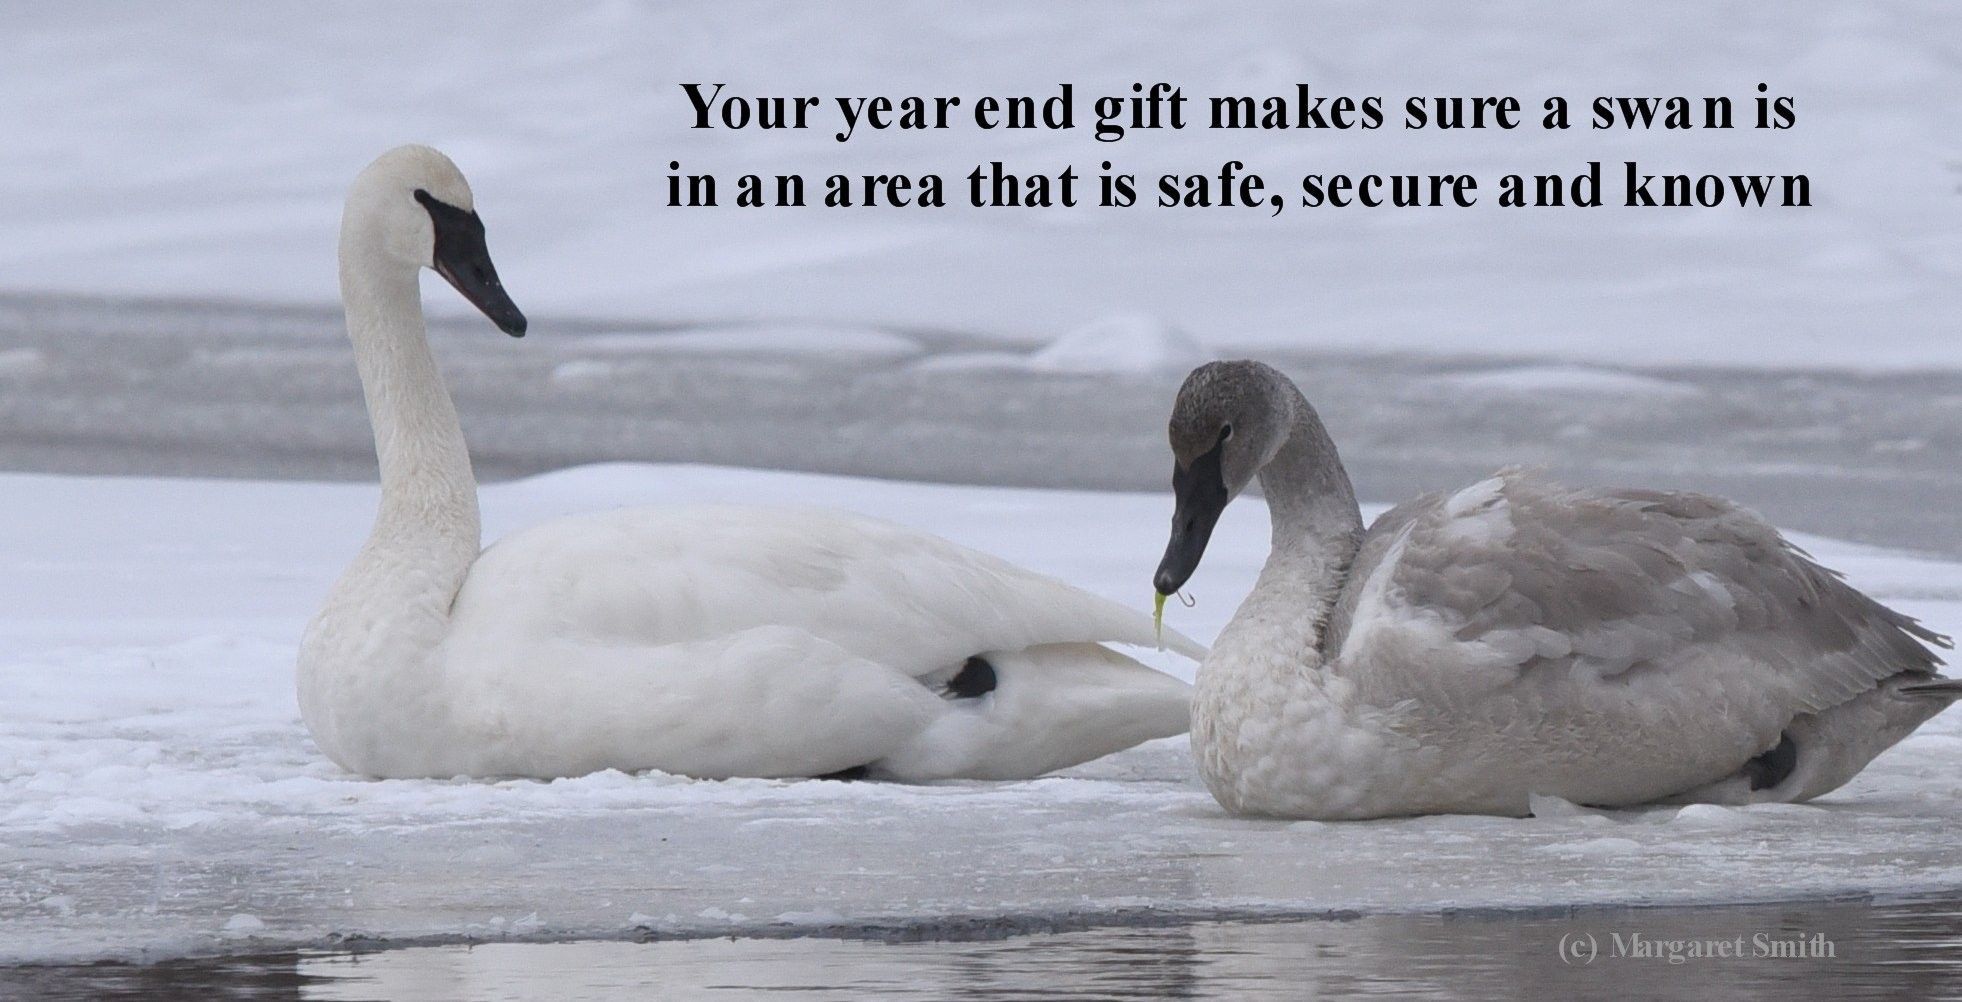 Make sure a swan is safe and secure through your year end donation to The Trumpeter Swan Society 